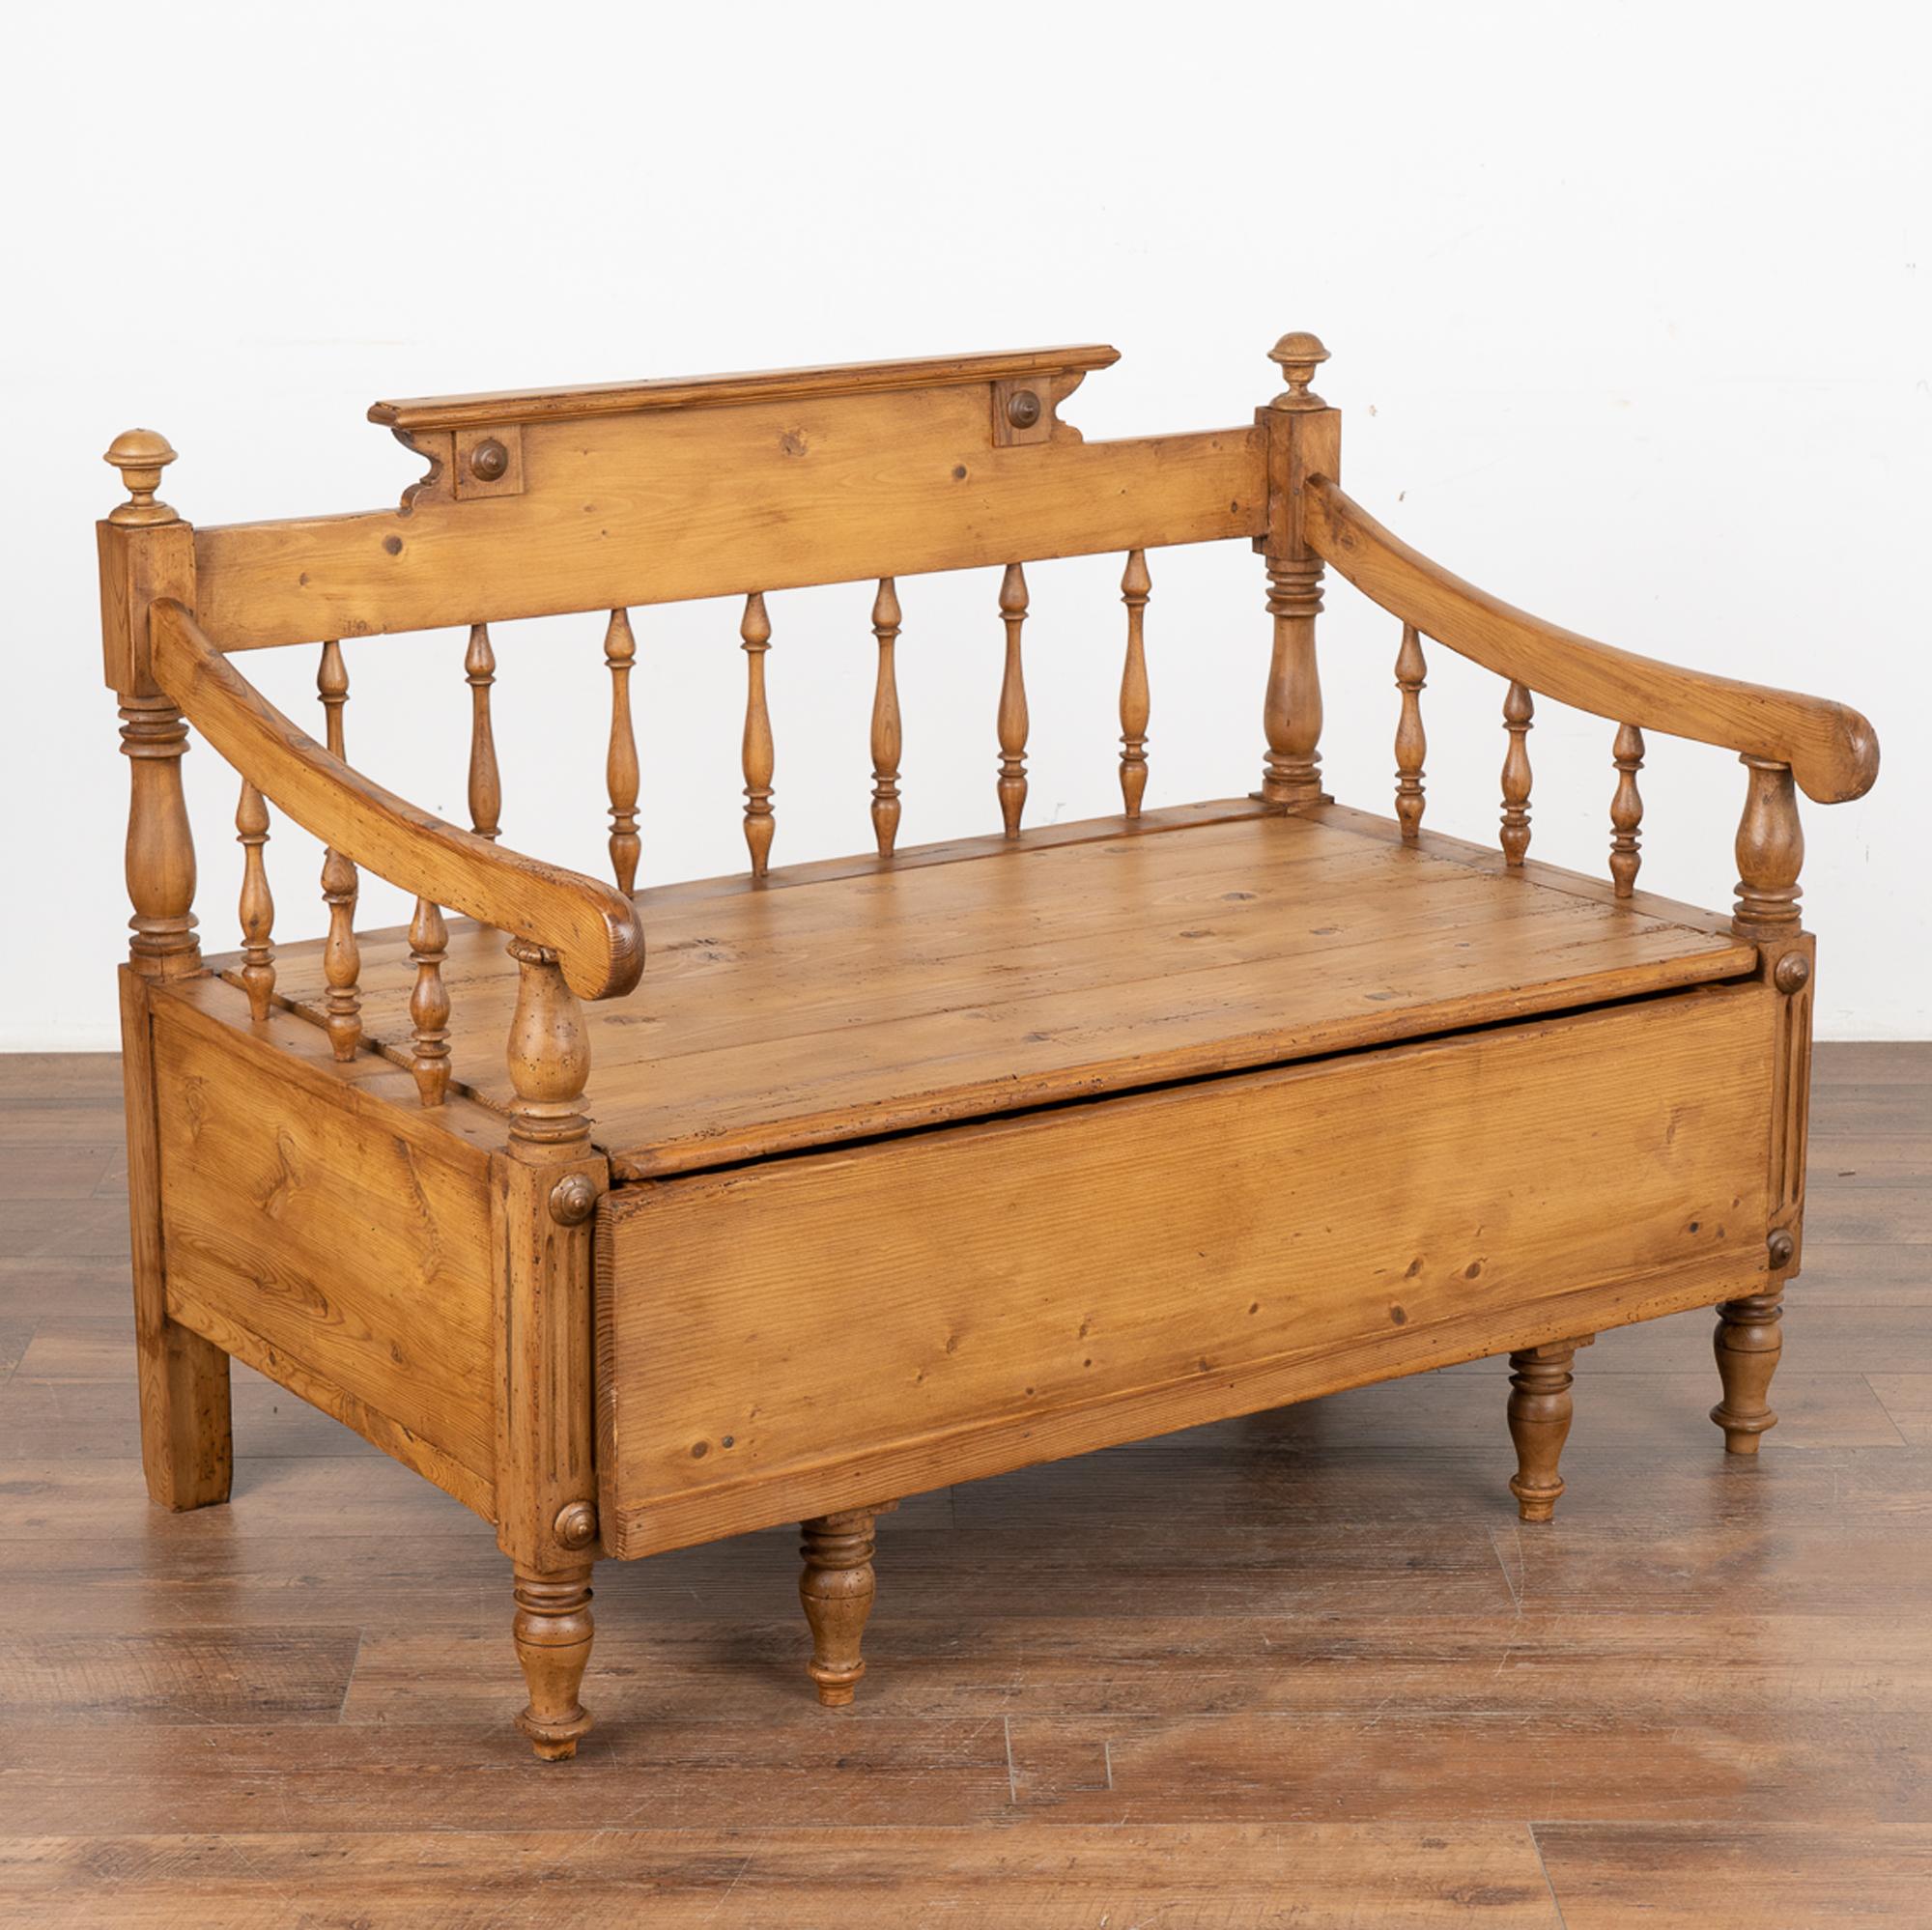 This delightful bench is a special find due to the unique small size. It was originally designed as a spare bed for a child; note how the seat lifts off to reveal storage space inside. When extended, the interior could house a small mattress similar